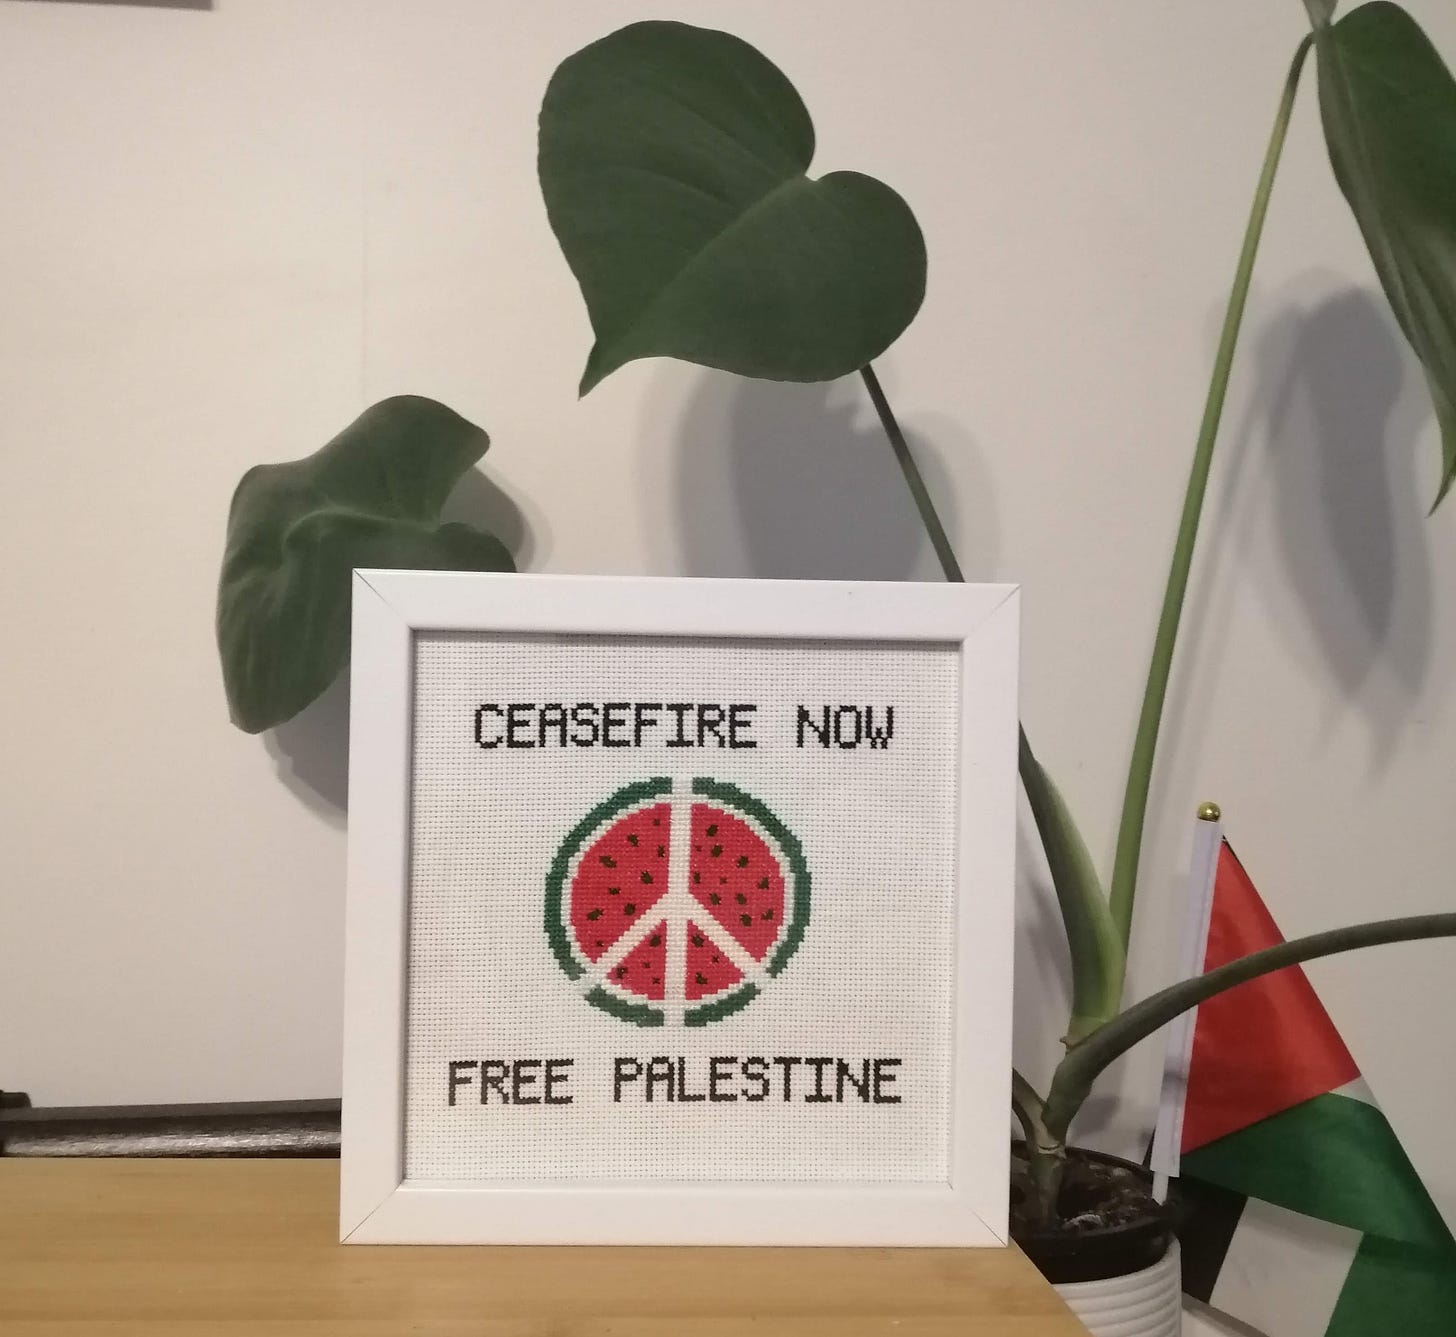 Cross stitch in a frame with the text "ceasefire now", a watermelon with the peace symbol through it and the text "free Palestine"